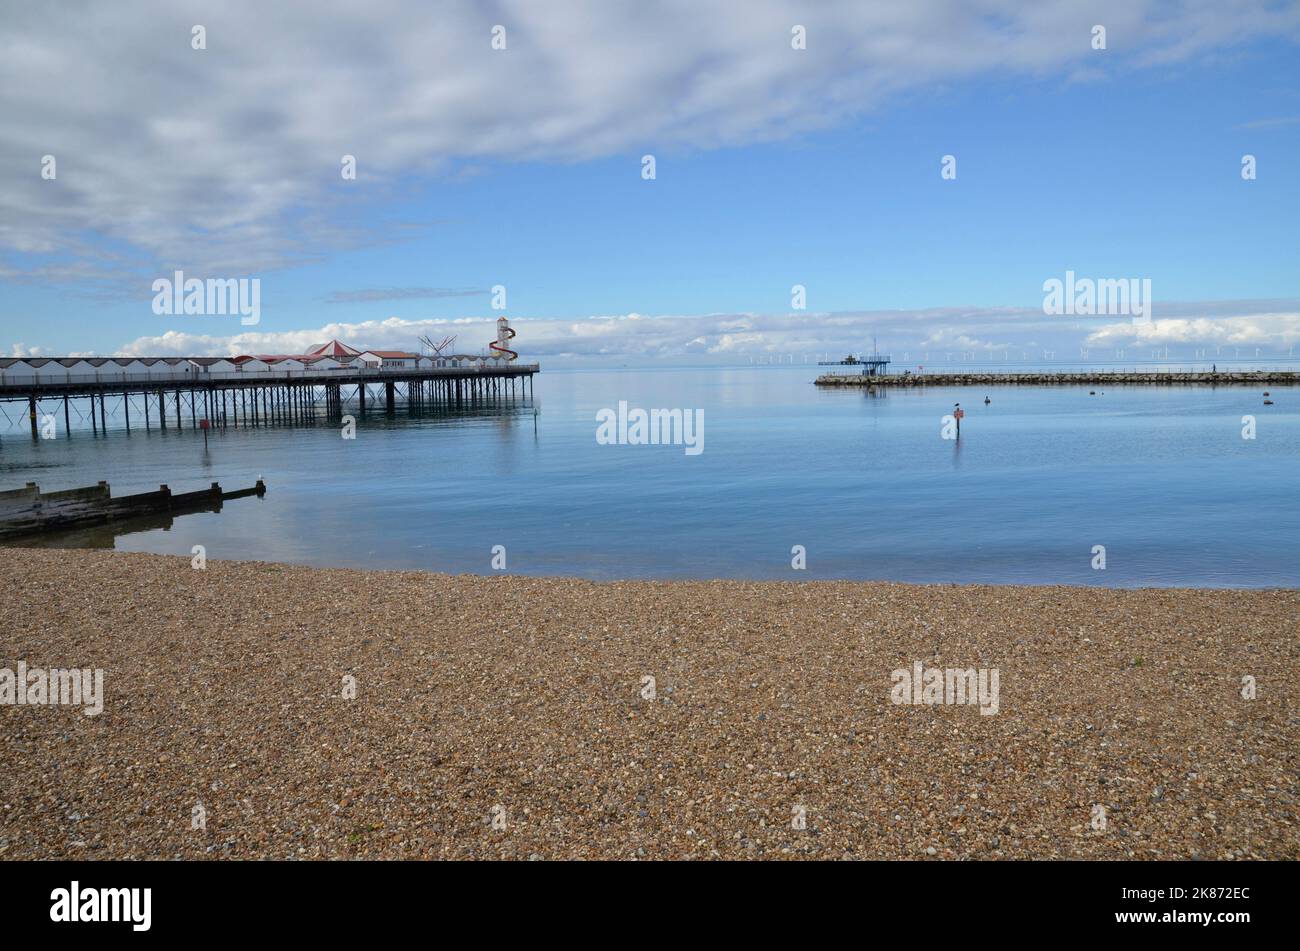 The pier at Herne Bay in Kent, England. Until it was damaged by a storm in 1978 it was the second longest pier in Britain. Stock Photo